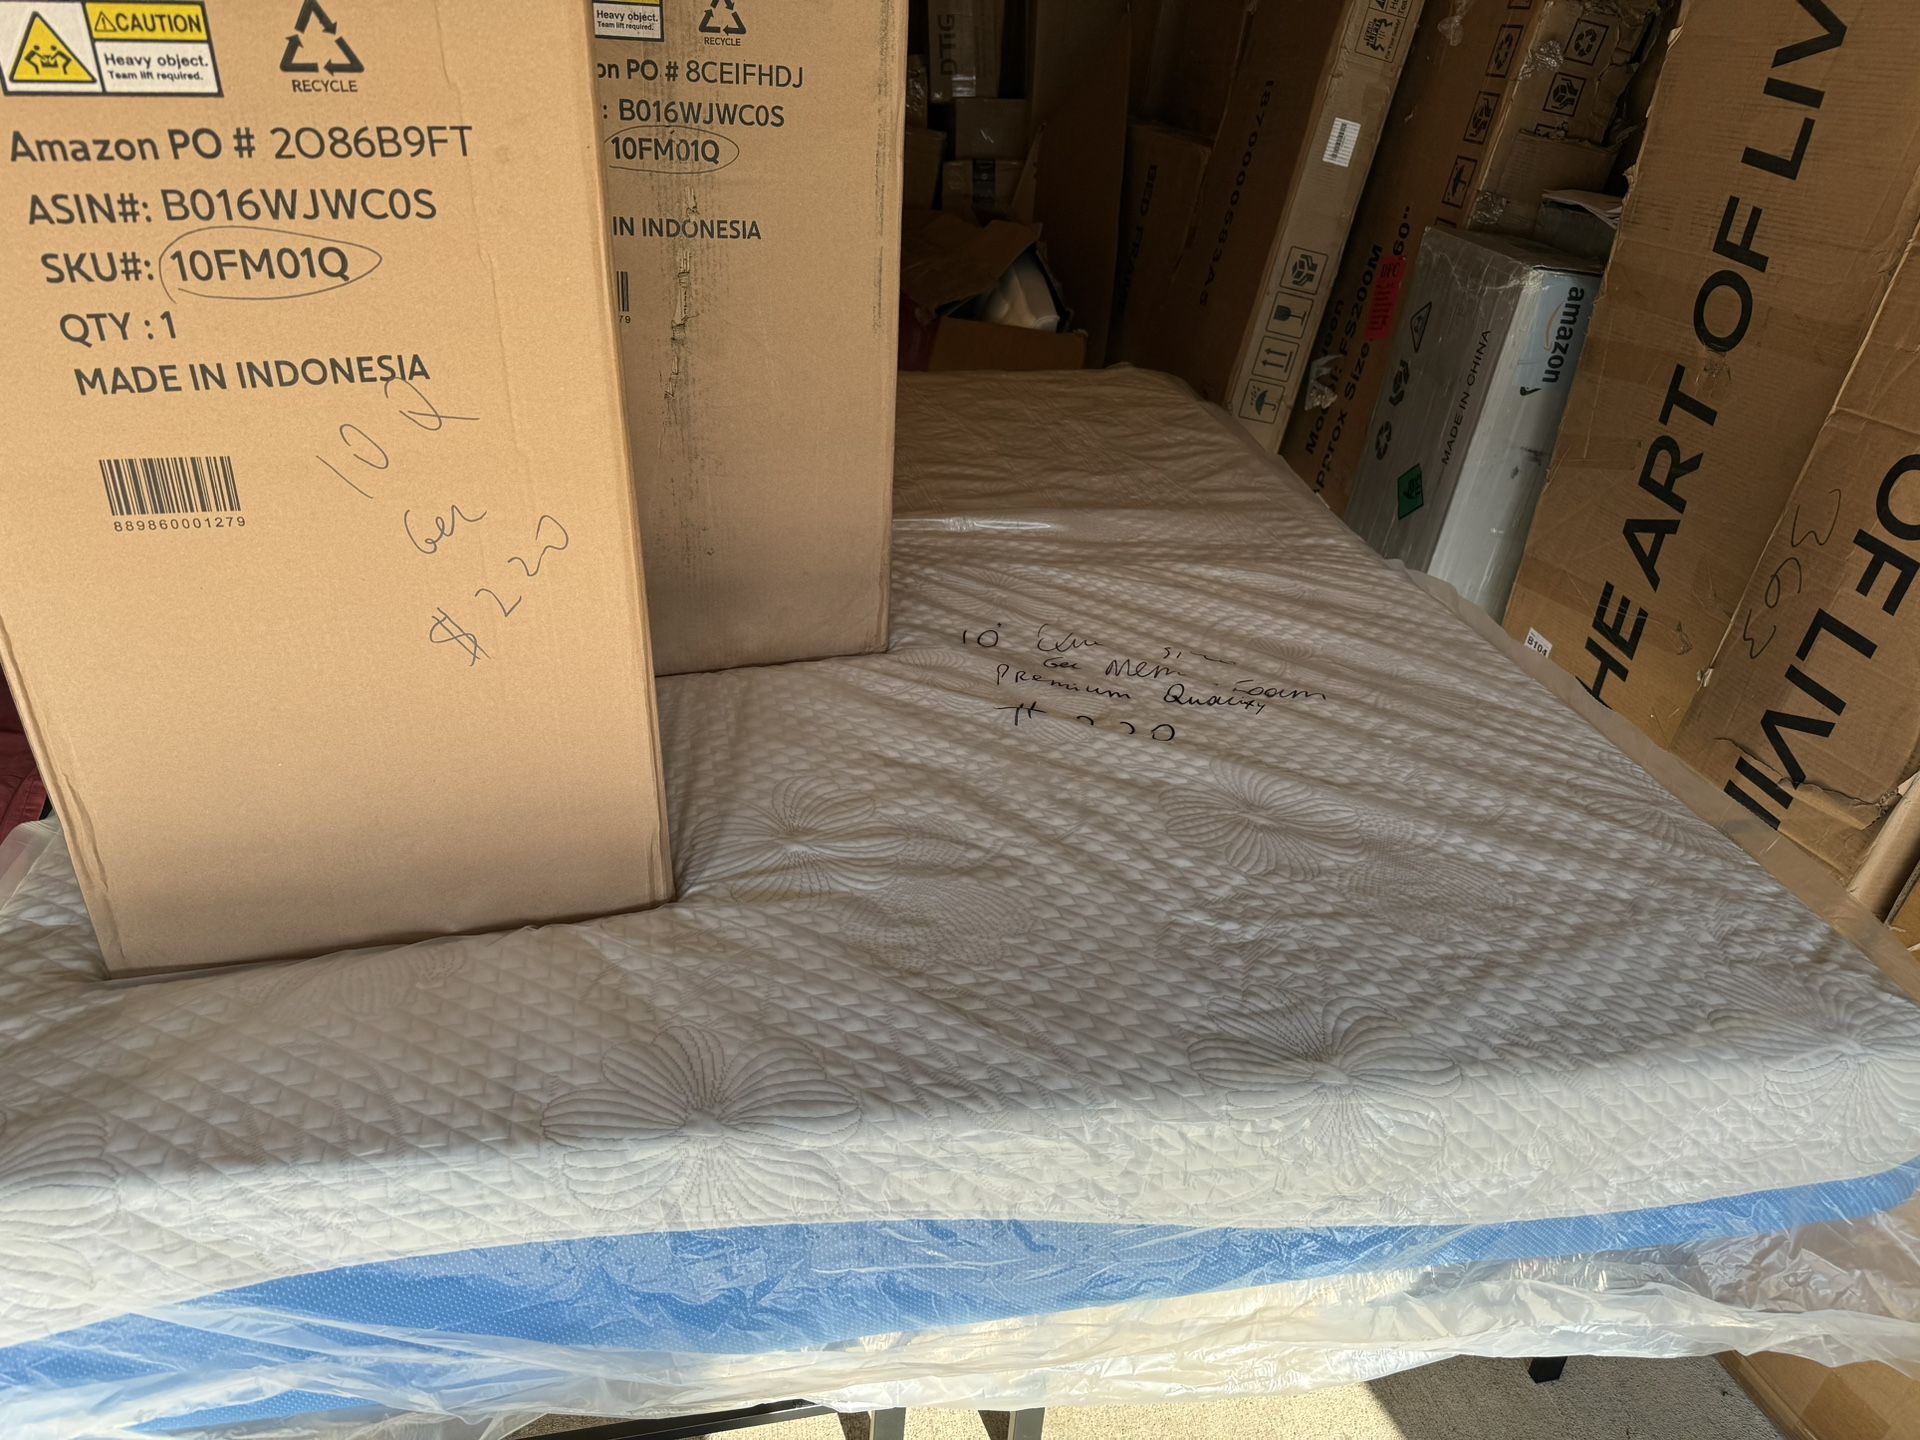 Gel Memory Foam Mattress In A Box Brand New $220 Or $300 With Platform Bed Frame Included